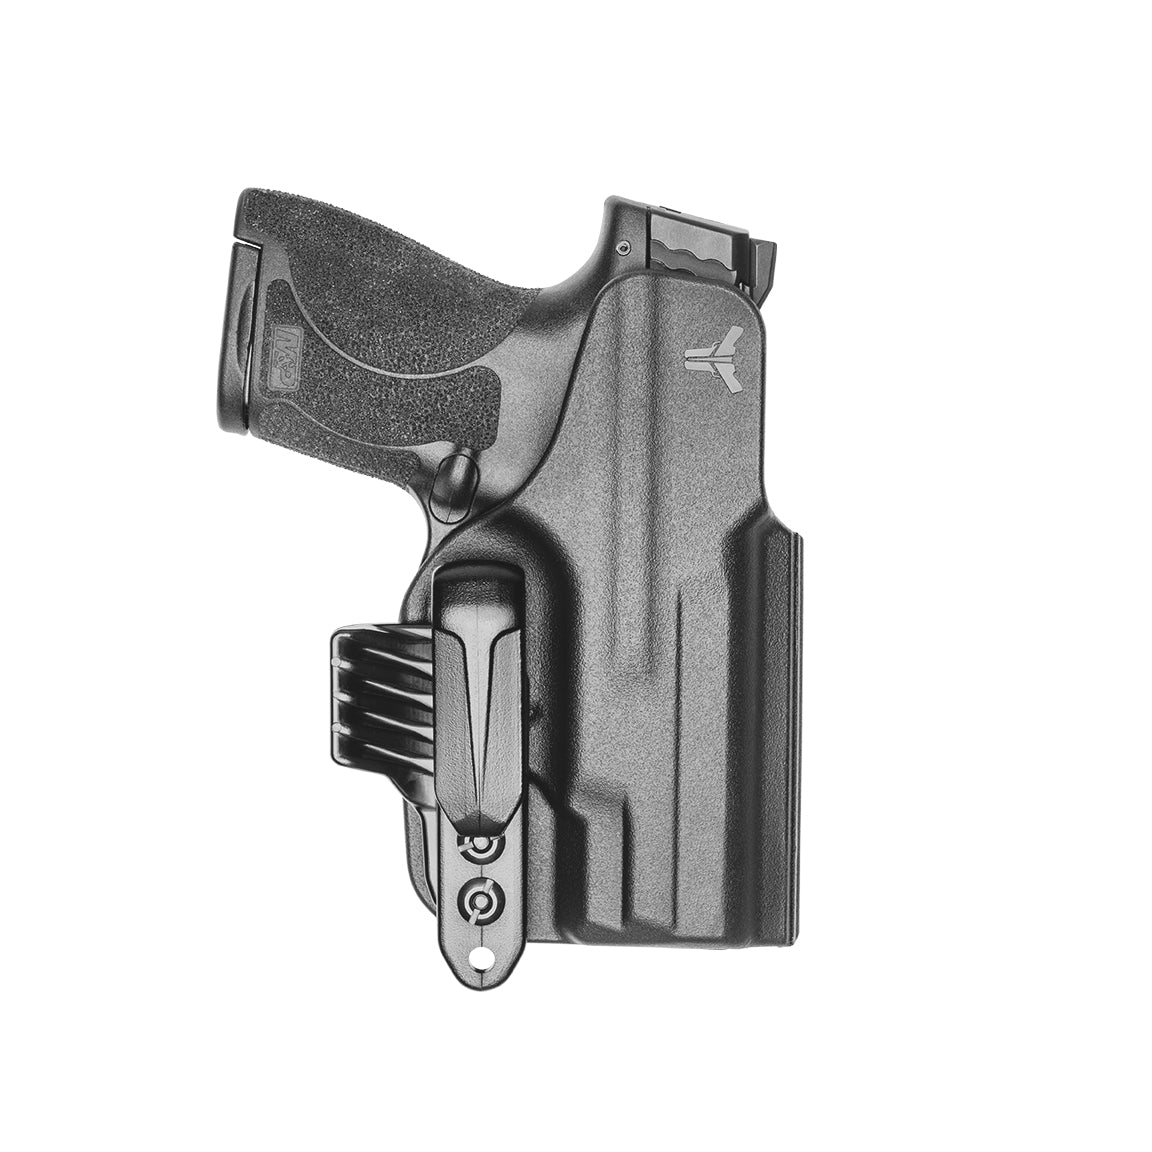 Ruger LCP II 380 Kydex Holster, Adjustable, Lifetime Warranty Clip Option  free Ship -  Canada